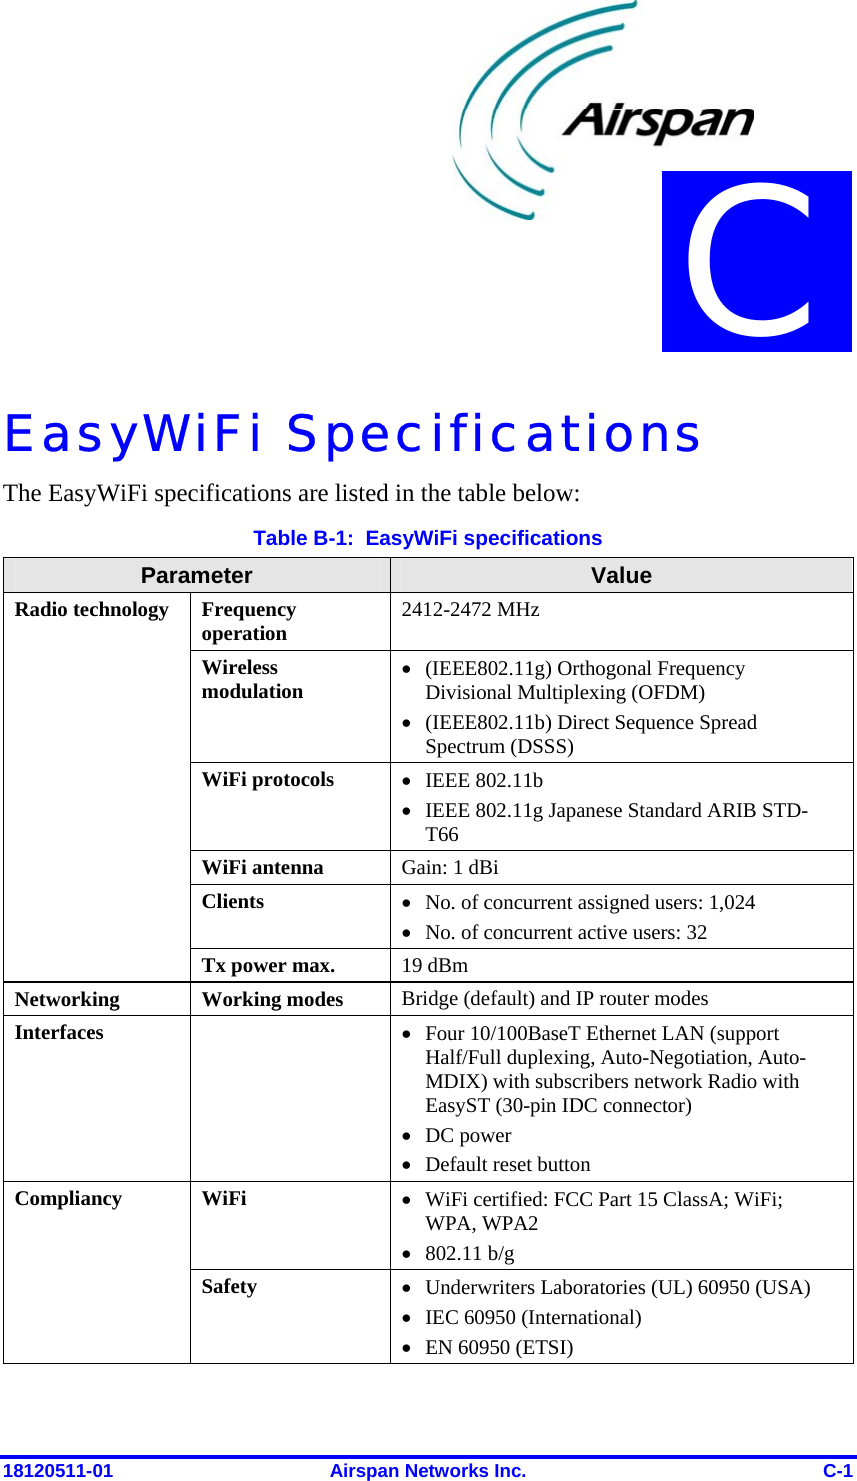  18120511-01  Airspan Networks Inc.  C-1 EasyWiFi Specifications The EasyWiFi specifications are listed in the table below: Table B-1:  EasyWiFi specifications Parameter  Value Frequency operation  2412-2472 MHz Wireless modulation • (IEEE802.11g) Orthogonal Frequency Divisional Multiplexing (OFDM) • (IEEE802.11b) Direct Sequence Spread Spectrum (DSSS) WiFi protocols  • IEEE 802.11b • IEEE 802.11g Japanese Standard ARIB STD-T66   WiFi antenna  Gain: 1 dBi Clients  • No. of concurrent assigned users: 1,024  • No. of concurrent active users: 32 Radio technology Tx power max.  19 dBm Networking Working modes Bridge (default) and IP router modes Interfaces   • Four 10/100BaseT Ethernet LAN (support Half/Full duplexing, Auto-Negotiation, Auto-MDIX) with subscribers network Radio with EasyST (30-pin IDC connector)  • DC power  • Default reset button WiFi  • WiFi certified: FCC Part 15 ClassA; WiFi; WPA, WPA2 • 802.11 b/g Compliancy Safety  • Underwriters Laboratories (UL) 60950 (USA)  • IEC 60950 (International)  • EN 60950 (ETSI) C 